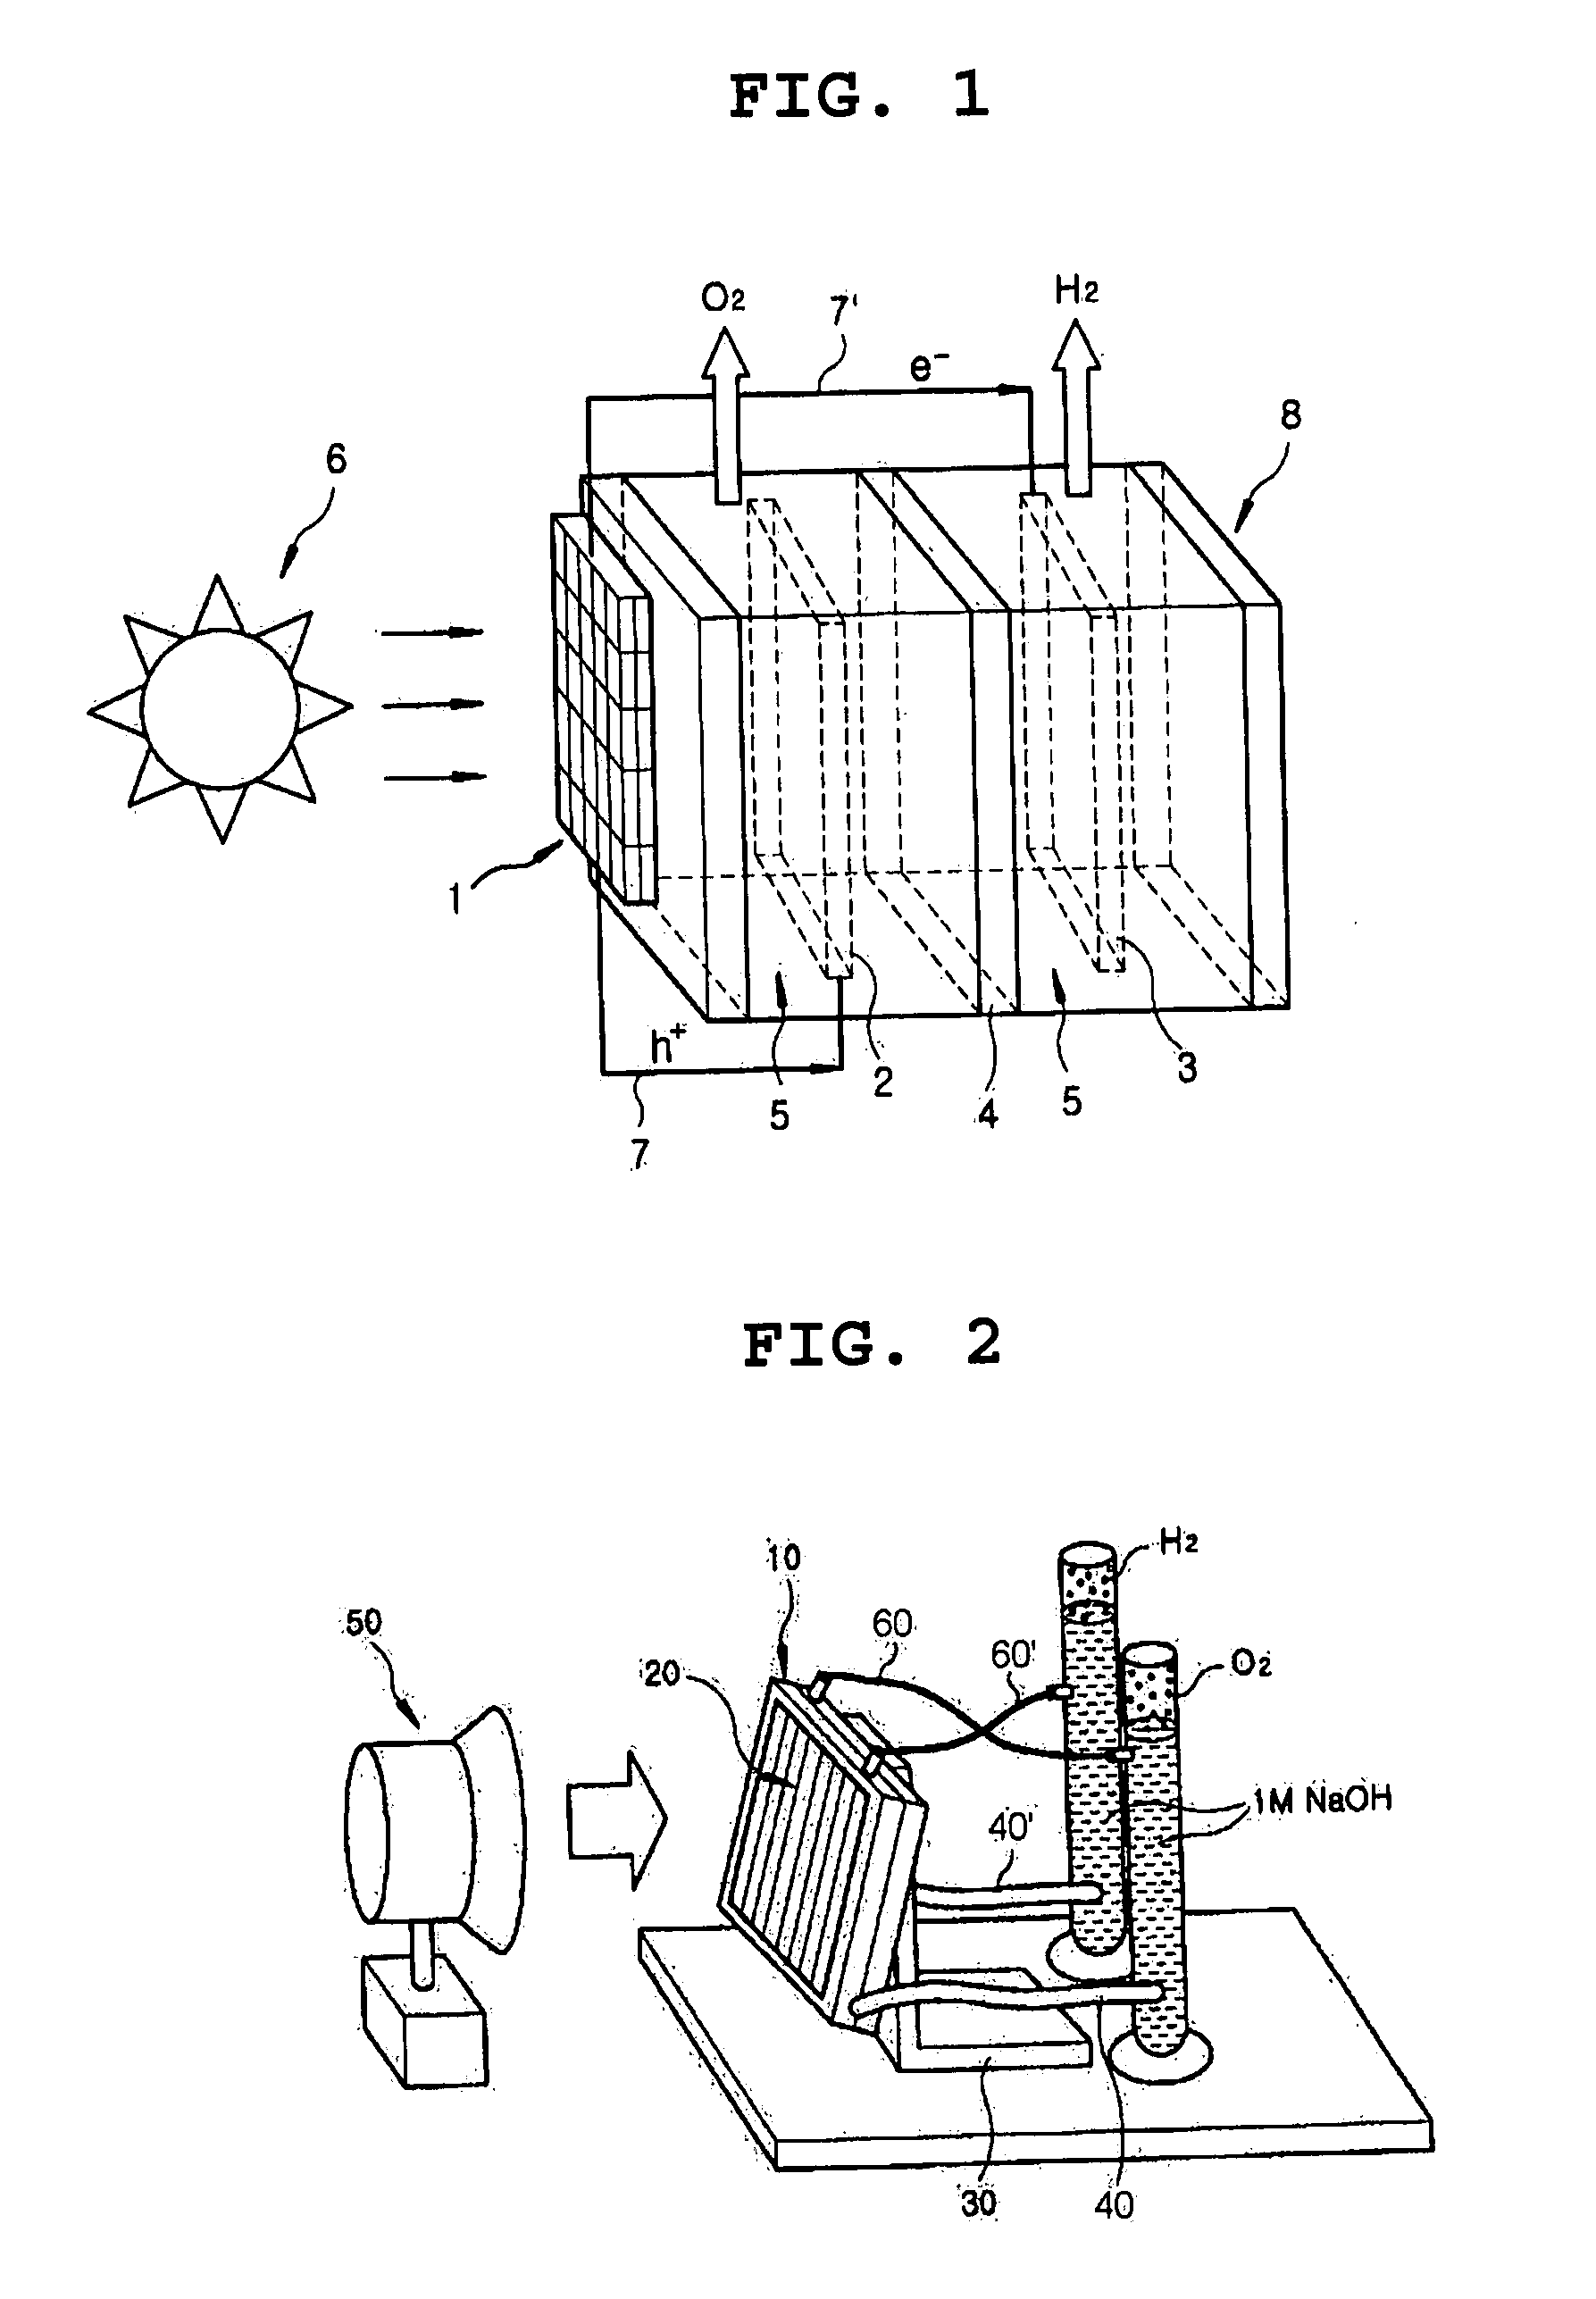 Photoelectrochemical system for hydrogen production from water